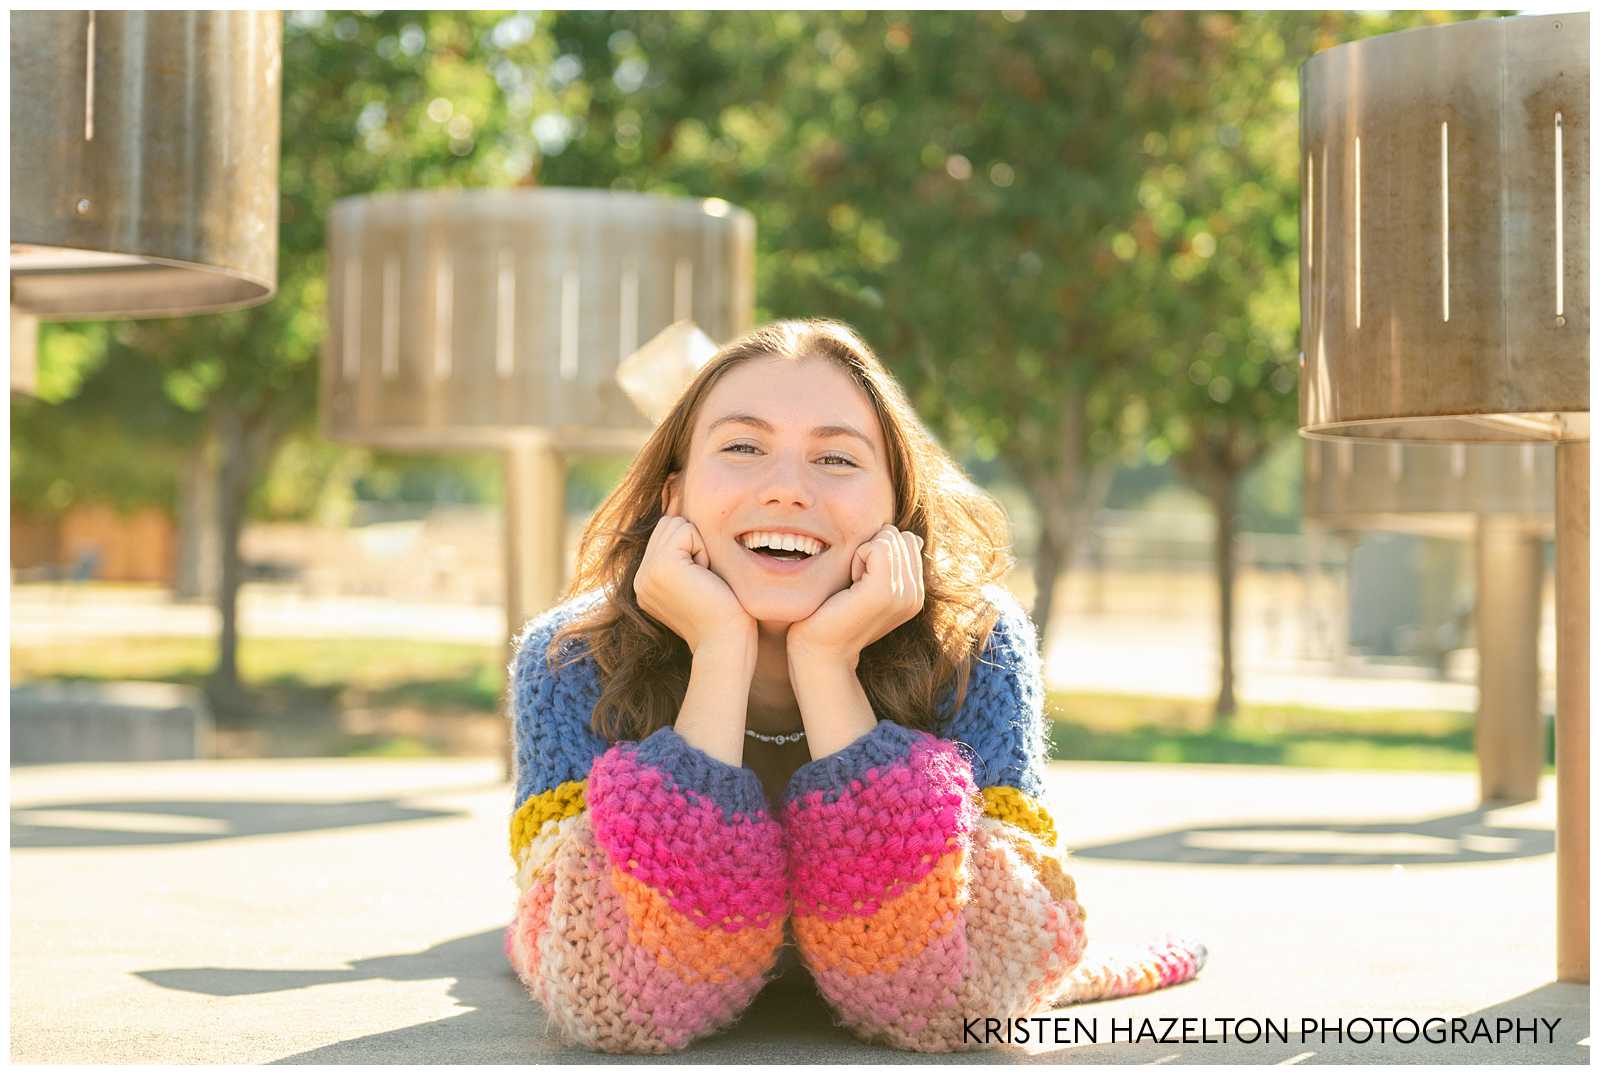 high school senior girl wearing a rainbow cardigan and lying down next to zoetrope sculptures in Niles in Fremont, California